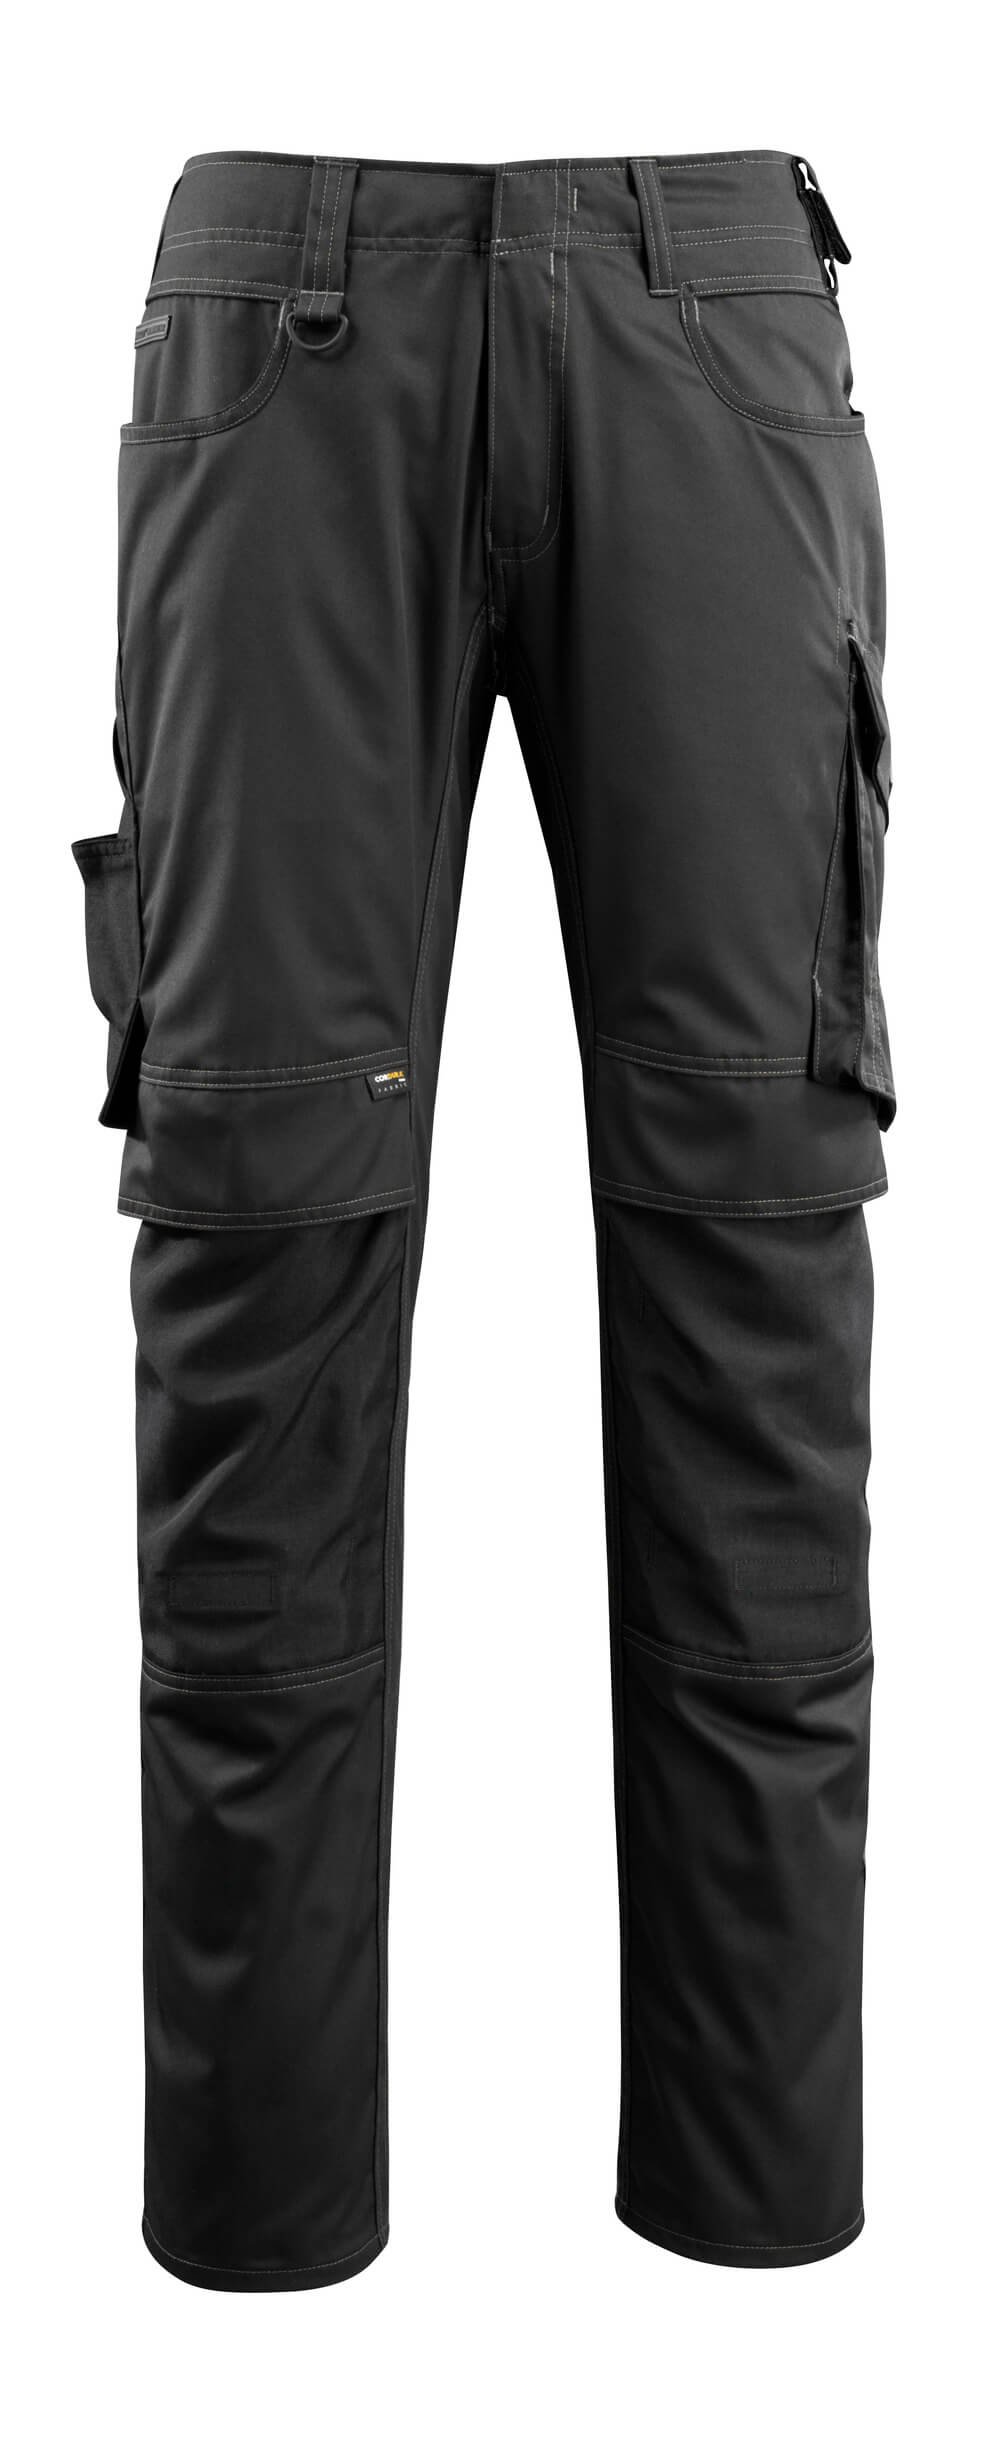 16079-230 Trousers with kneepad pockets - MASCOT® UNIQUE